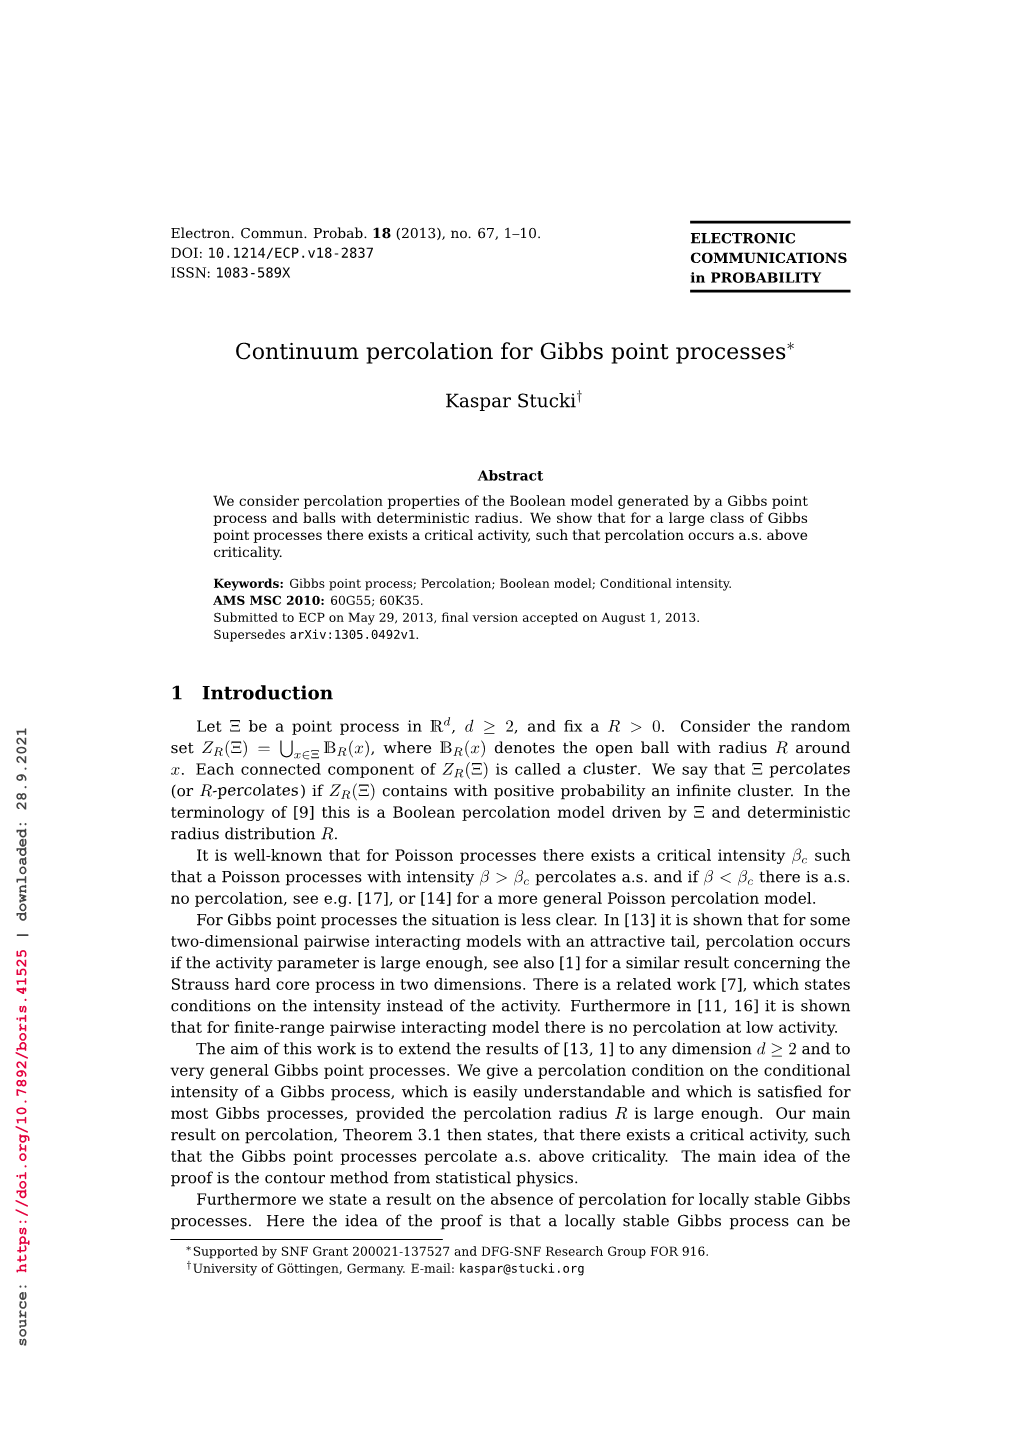 Continuum Percolation for Gibbs Point Processes Dominated by a Poisson Process, and Then We Use the Percolation Results Available for Poisson Processes